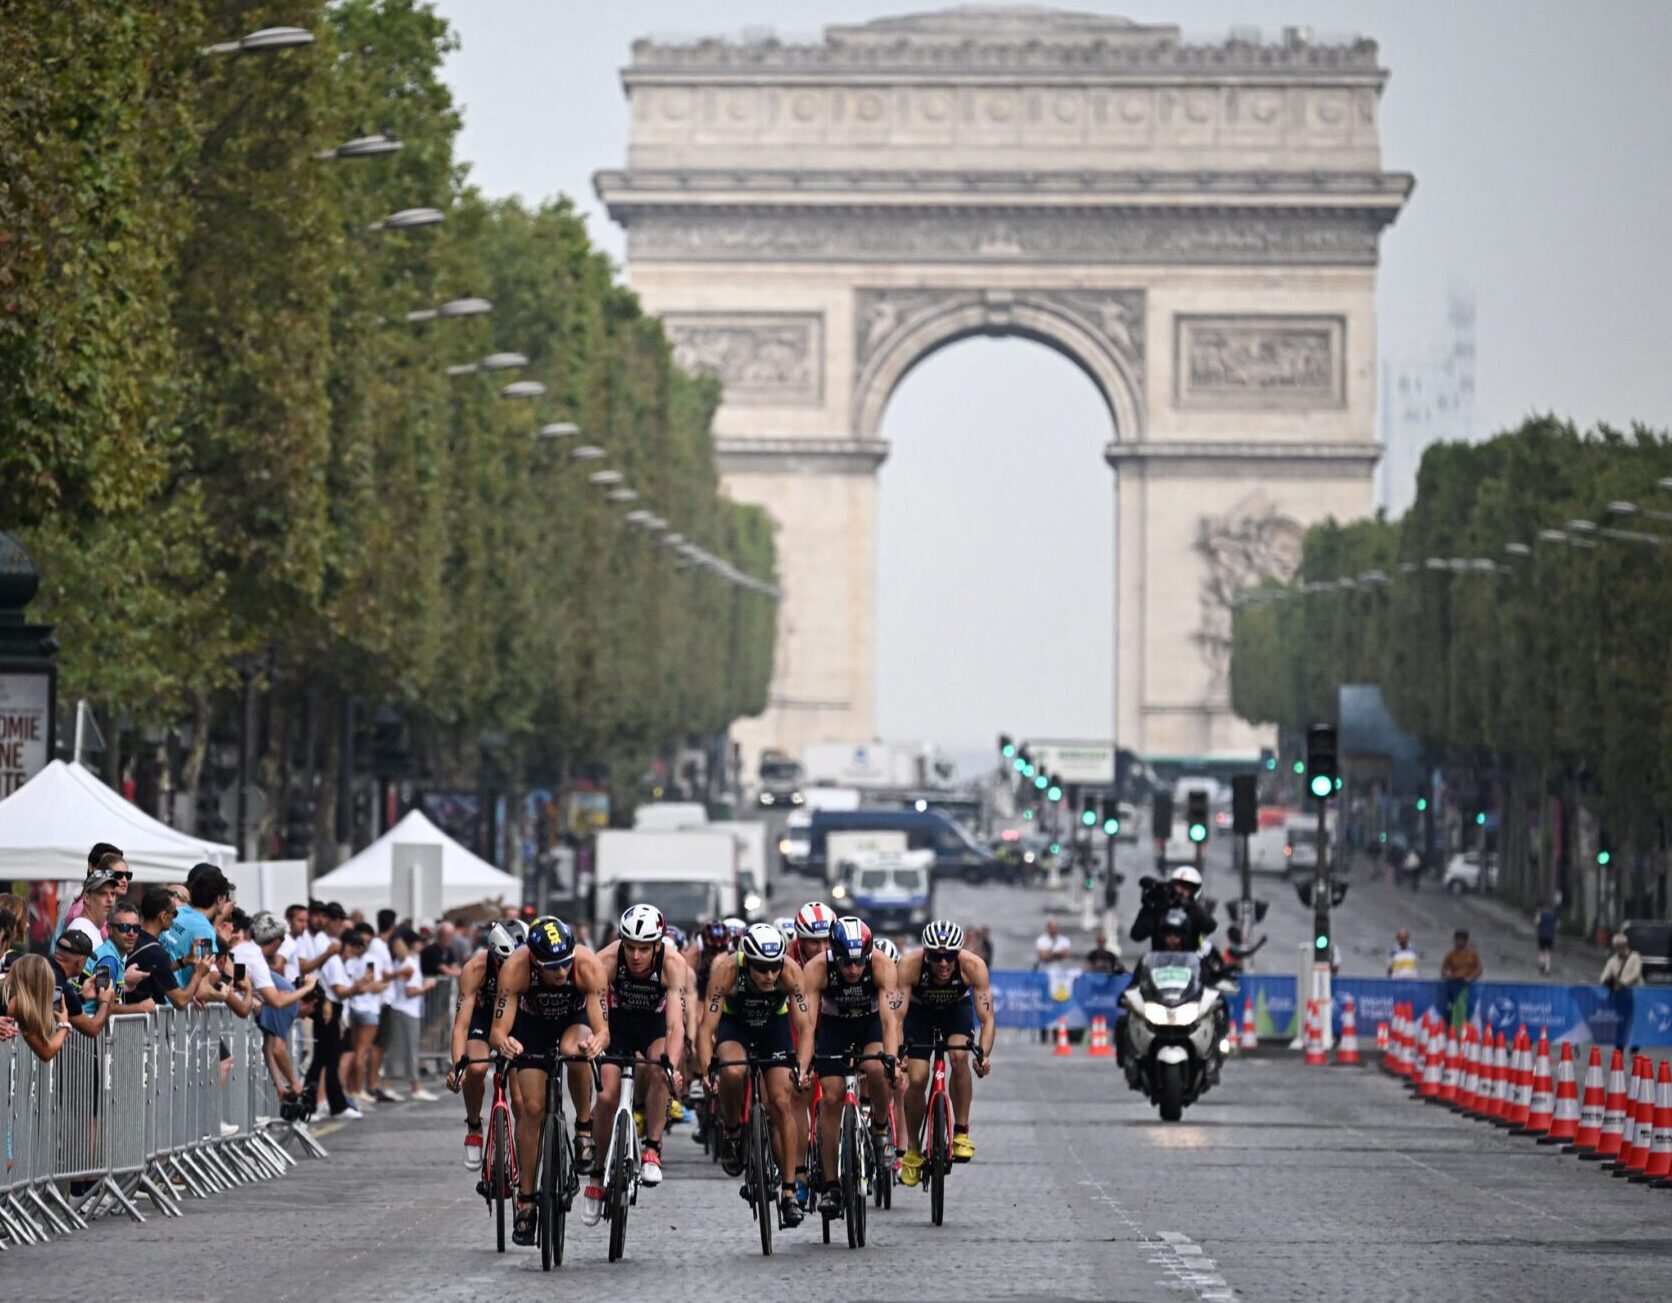 Paris officials project 16 millions travelers will descend upon the city for the 2024 Olympics.